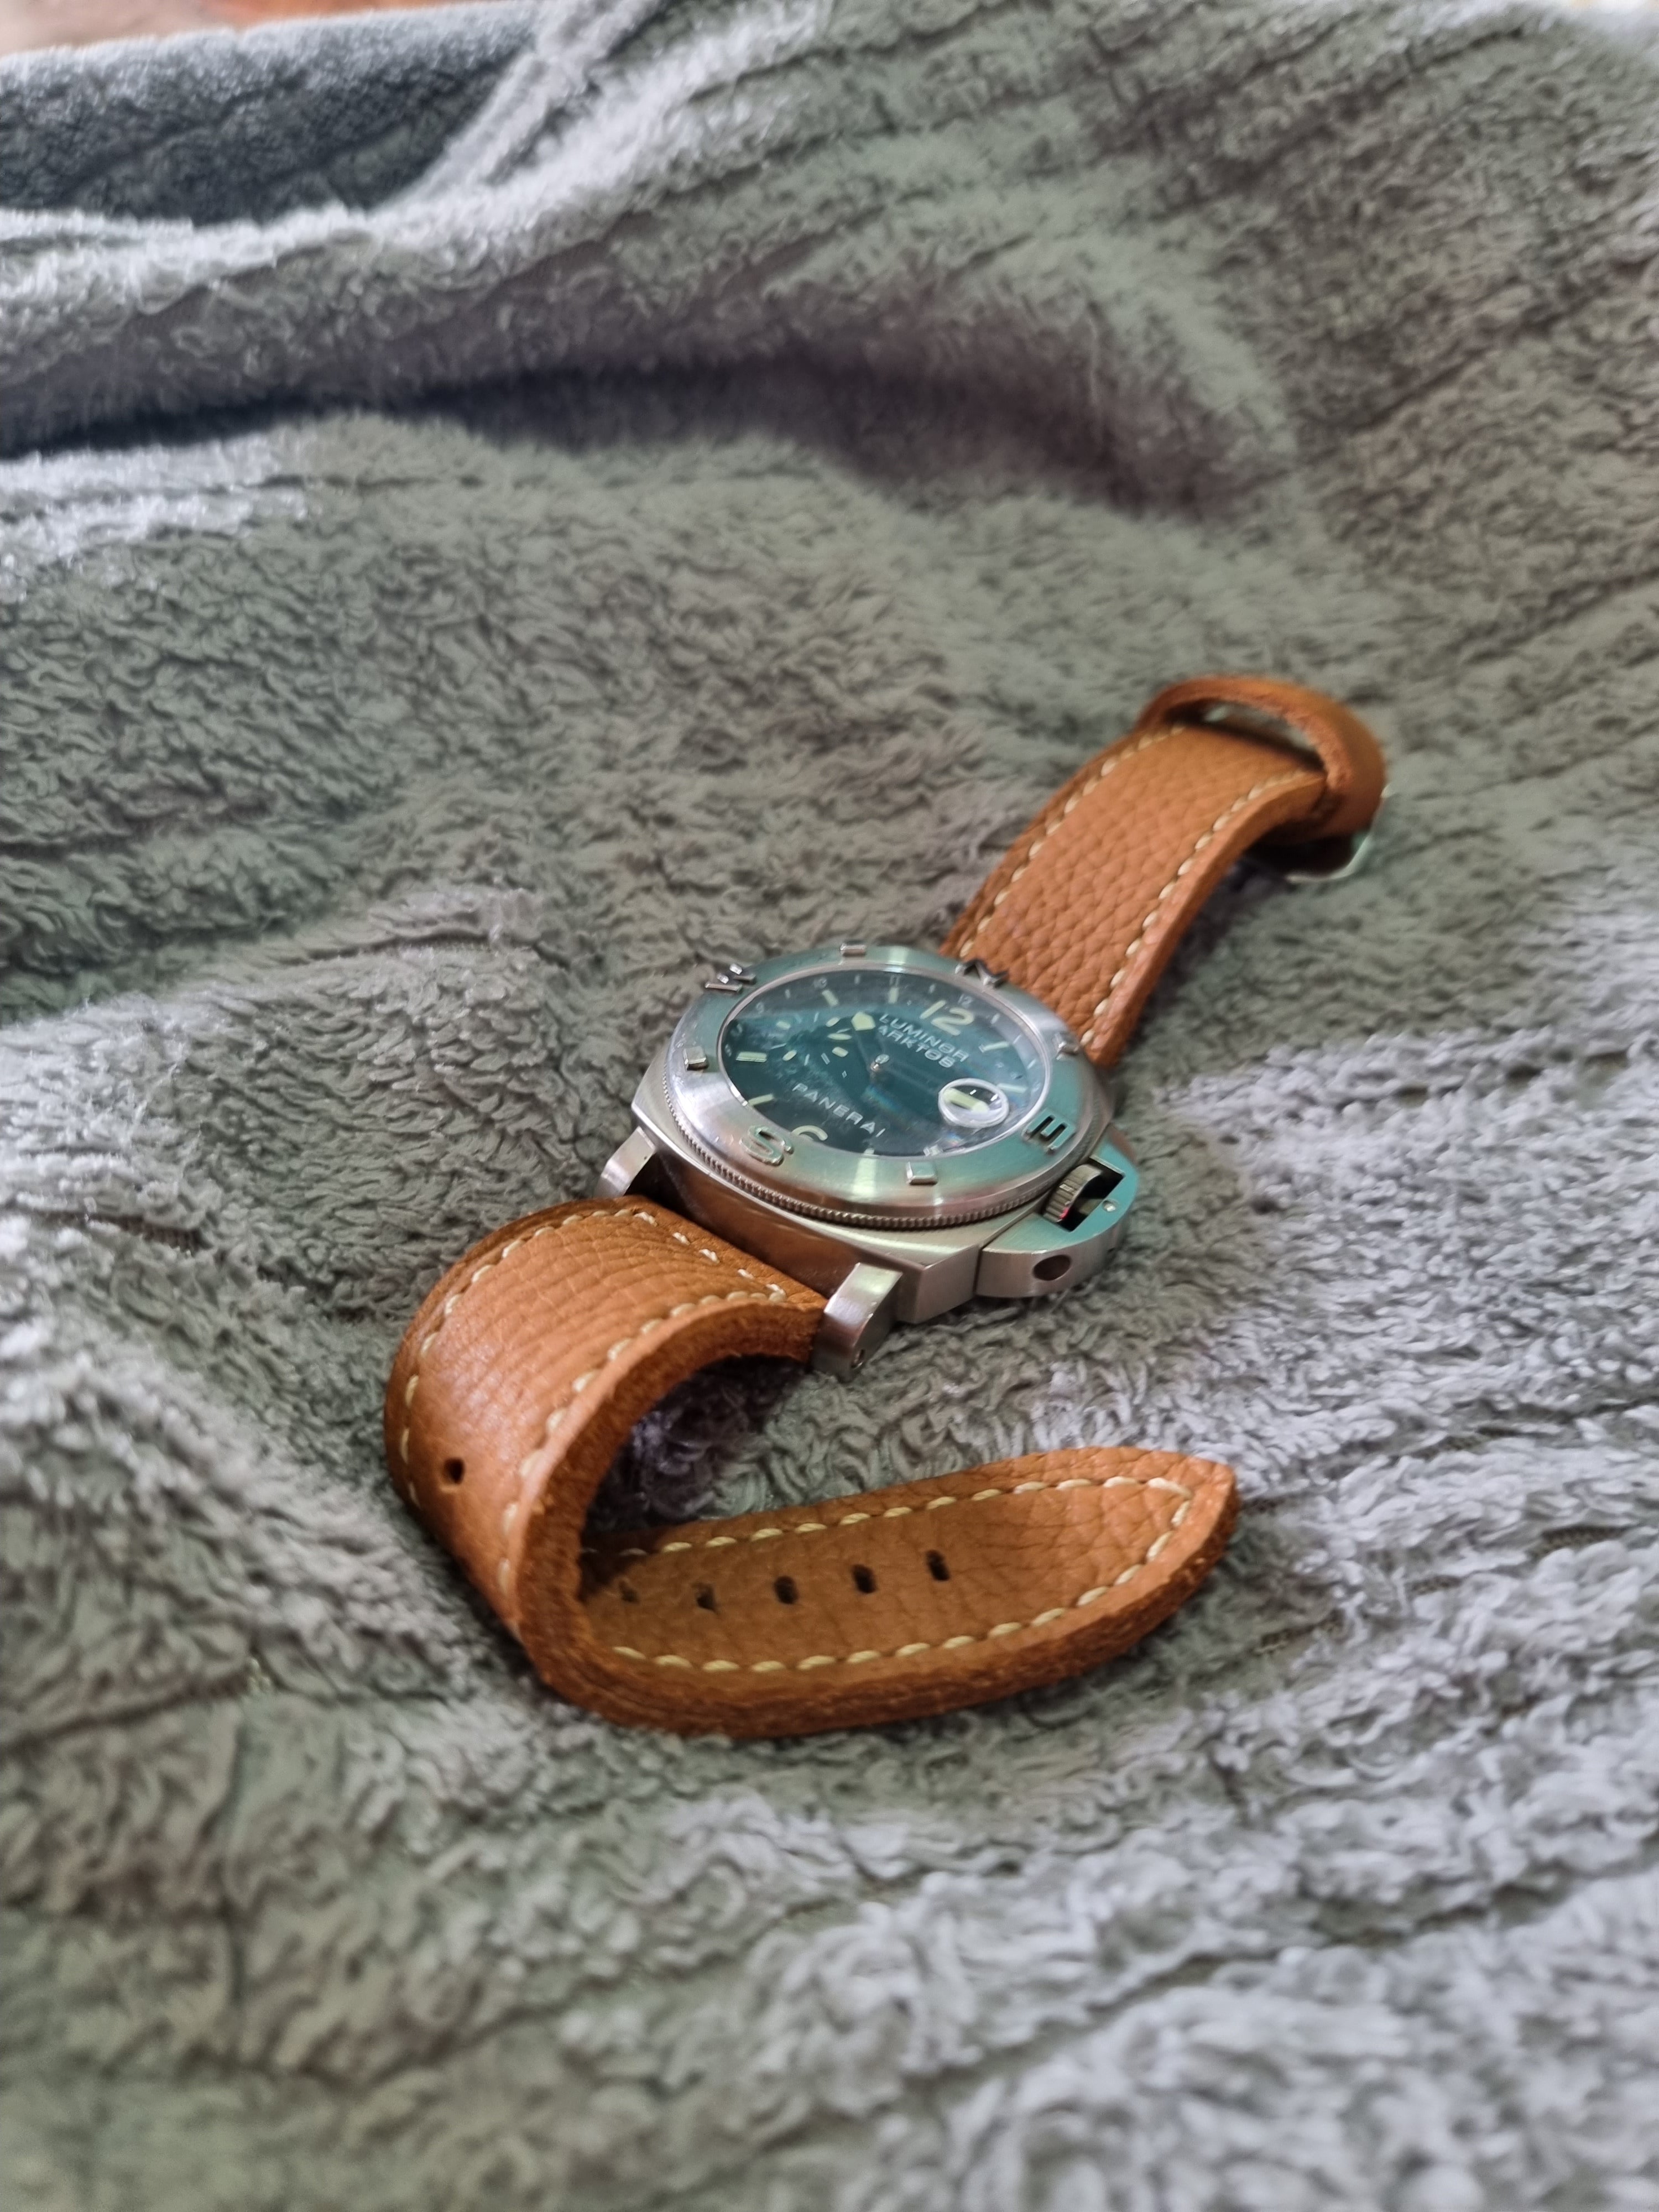 Broken strap for a Judge Brown Leather Watch?